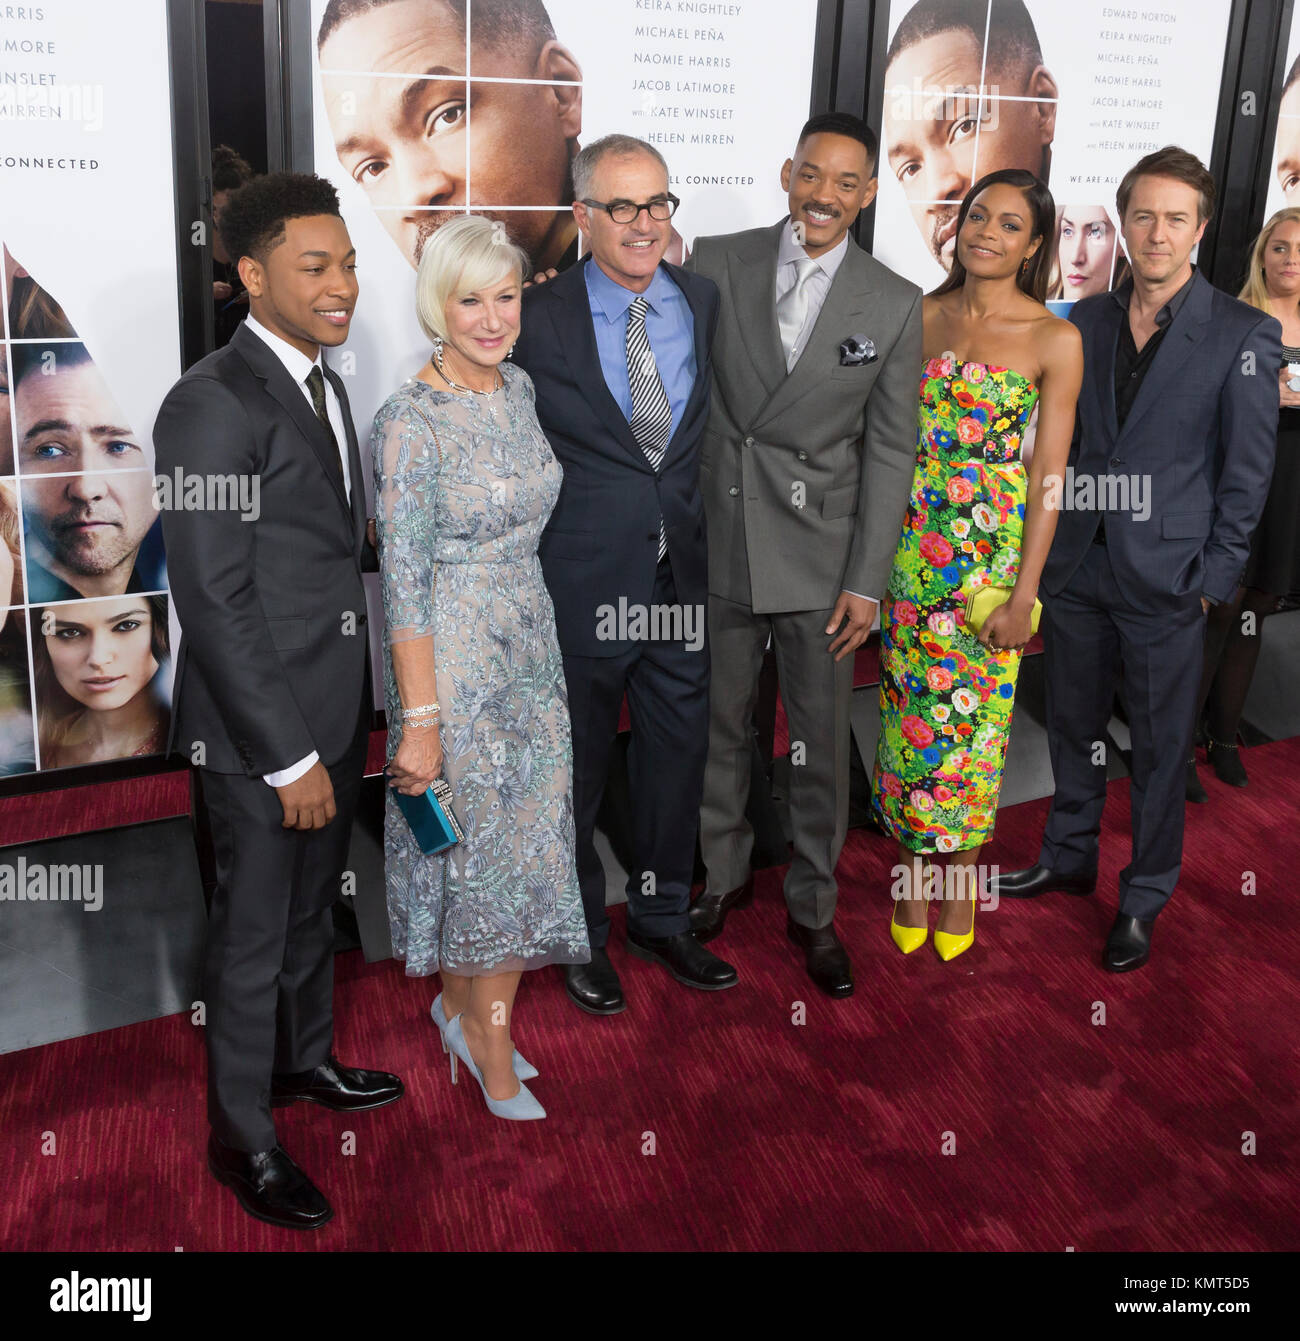 New York, NY - December 12. 2016: Jacob Latimore, Helen Mirren, David Frankel, Will Smith, Naomie Harris, Ed Norton attend Collateral Beauty movie premiere at Frederick Rose Hall Jazz at Lincoln Center Stock Photo